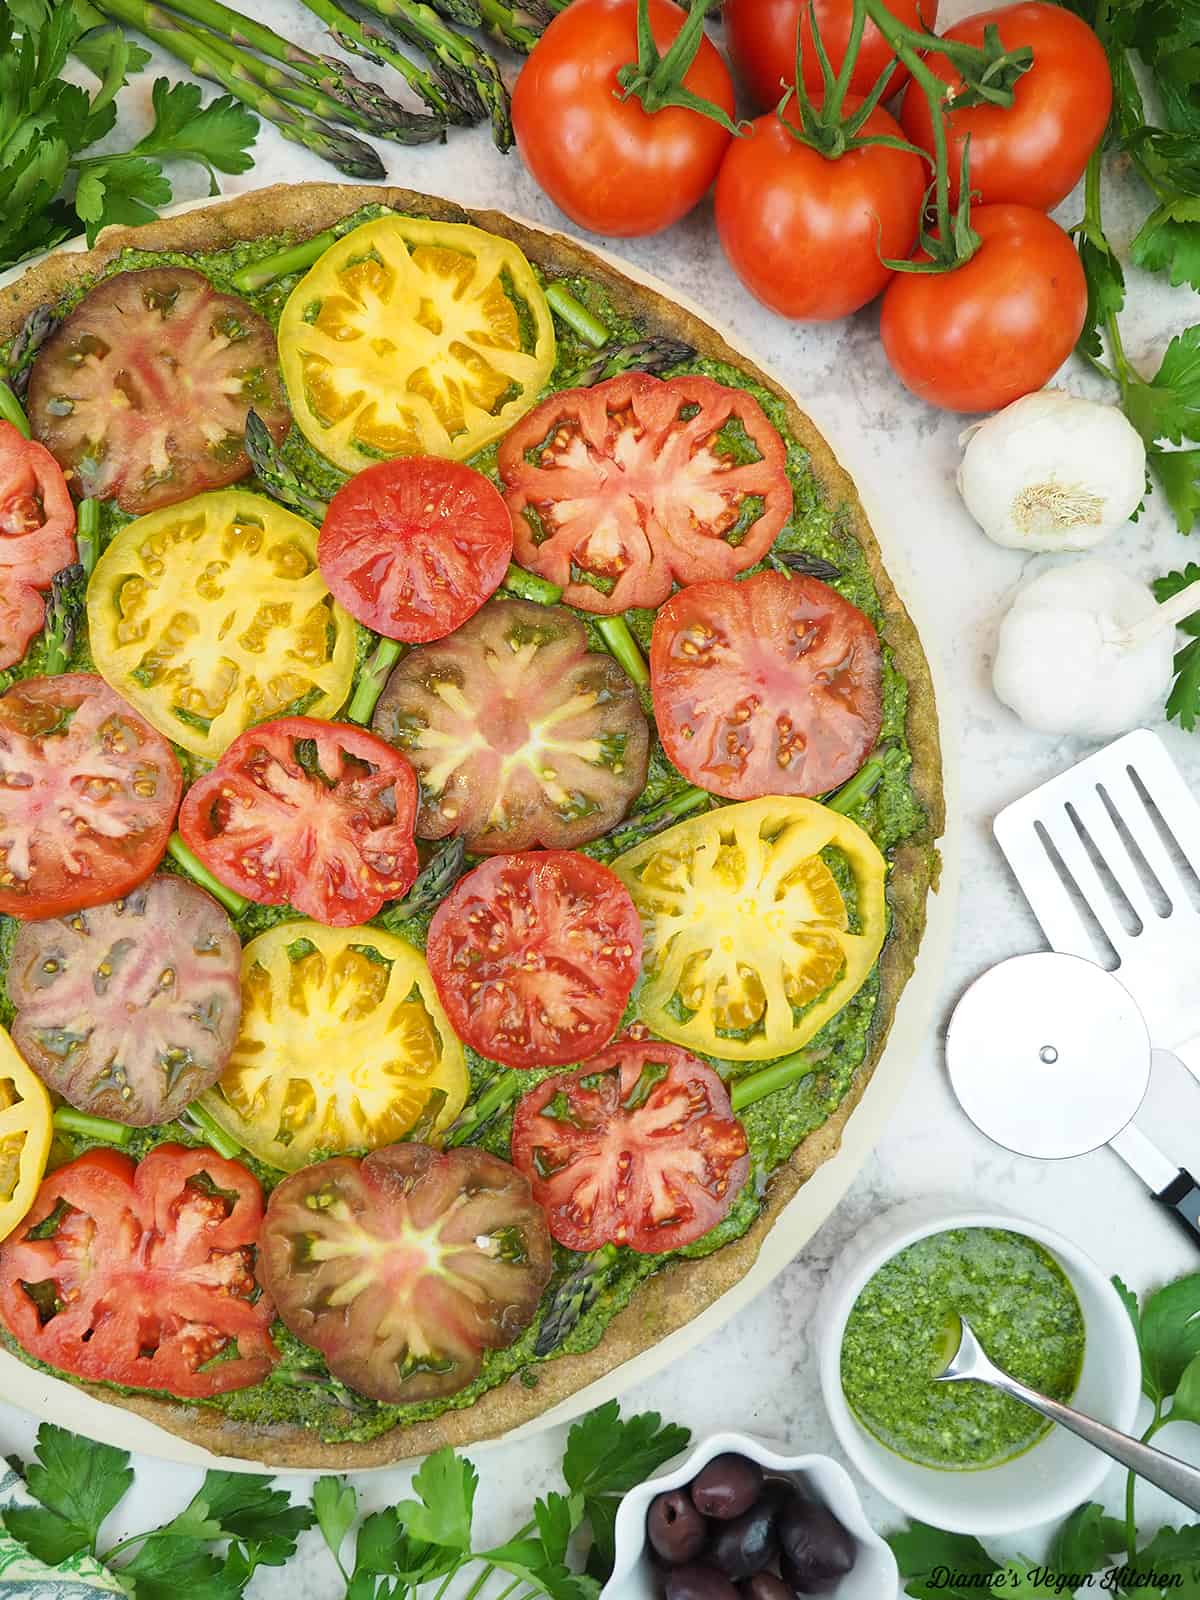 Grilled Pesto Tart surrounded by tomatoes, garlic, pesto, olives, and a pizza cutter